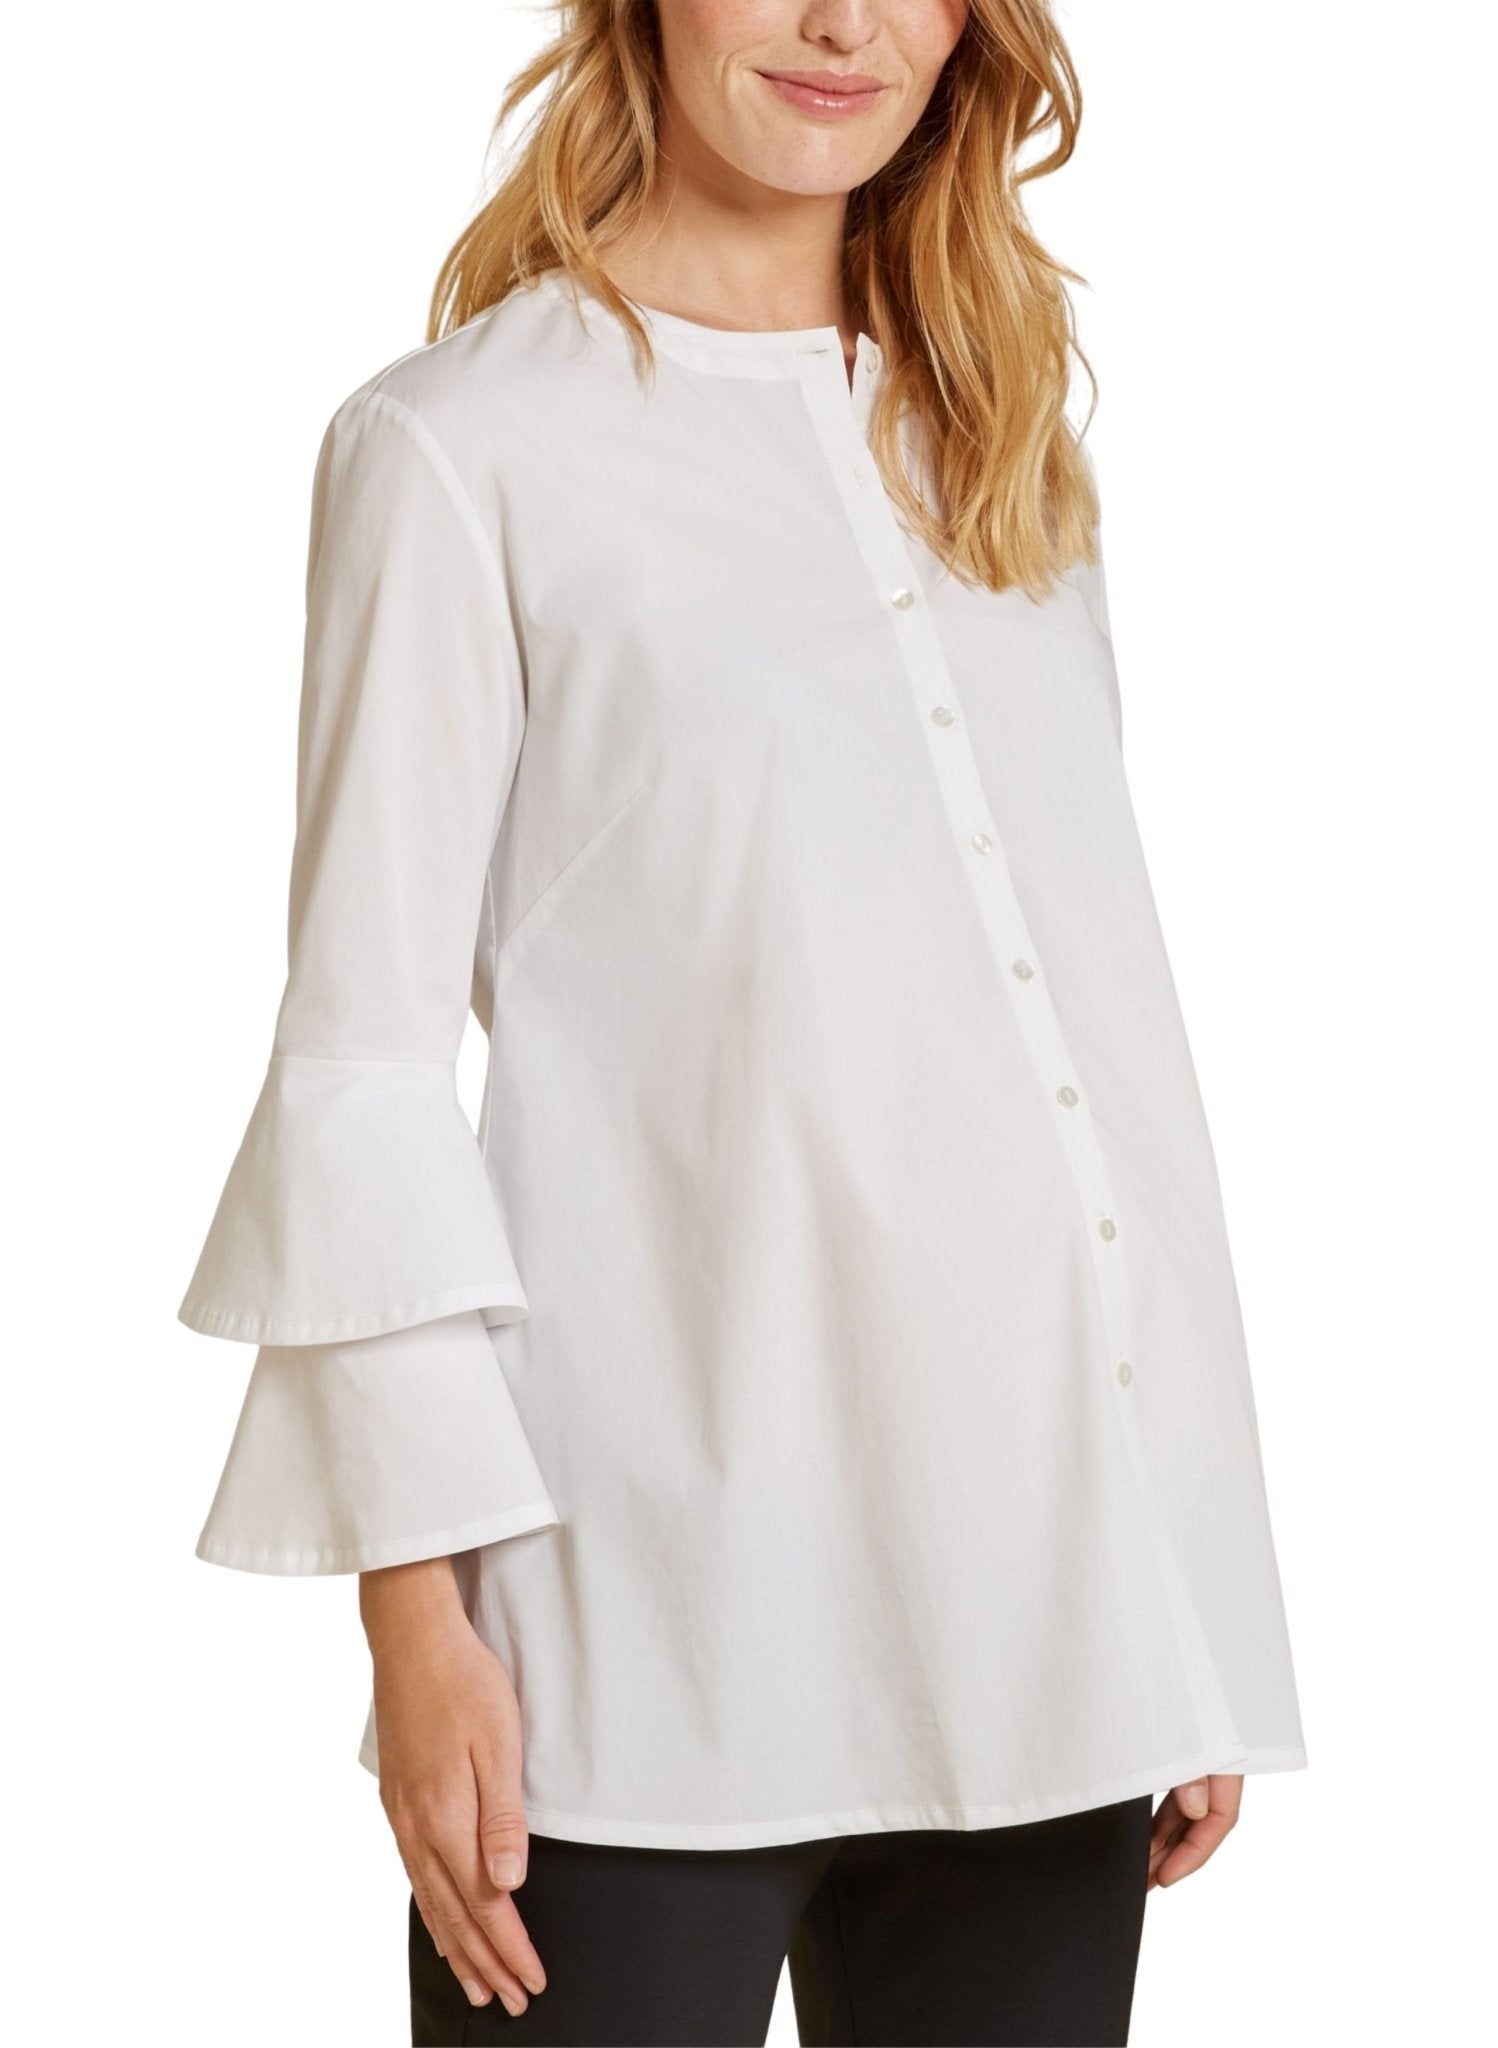 Rochelle Maternity Shirt - Mums and Bumps